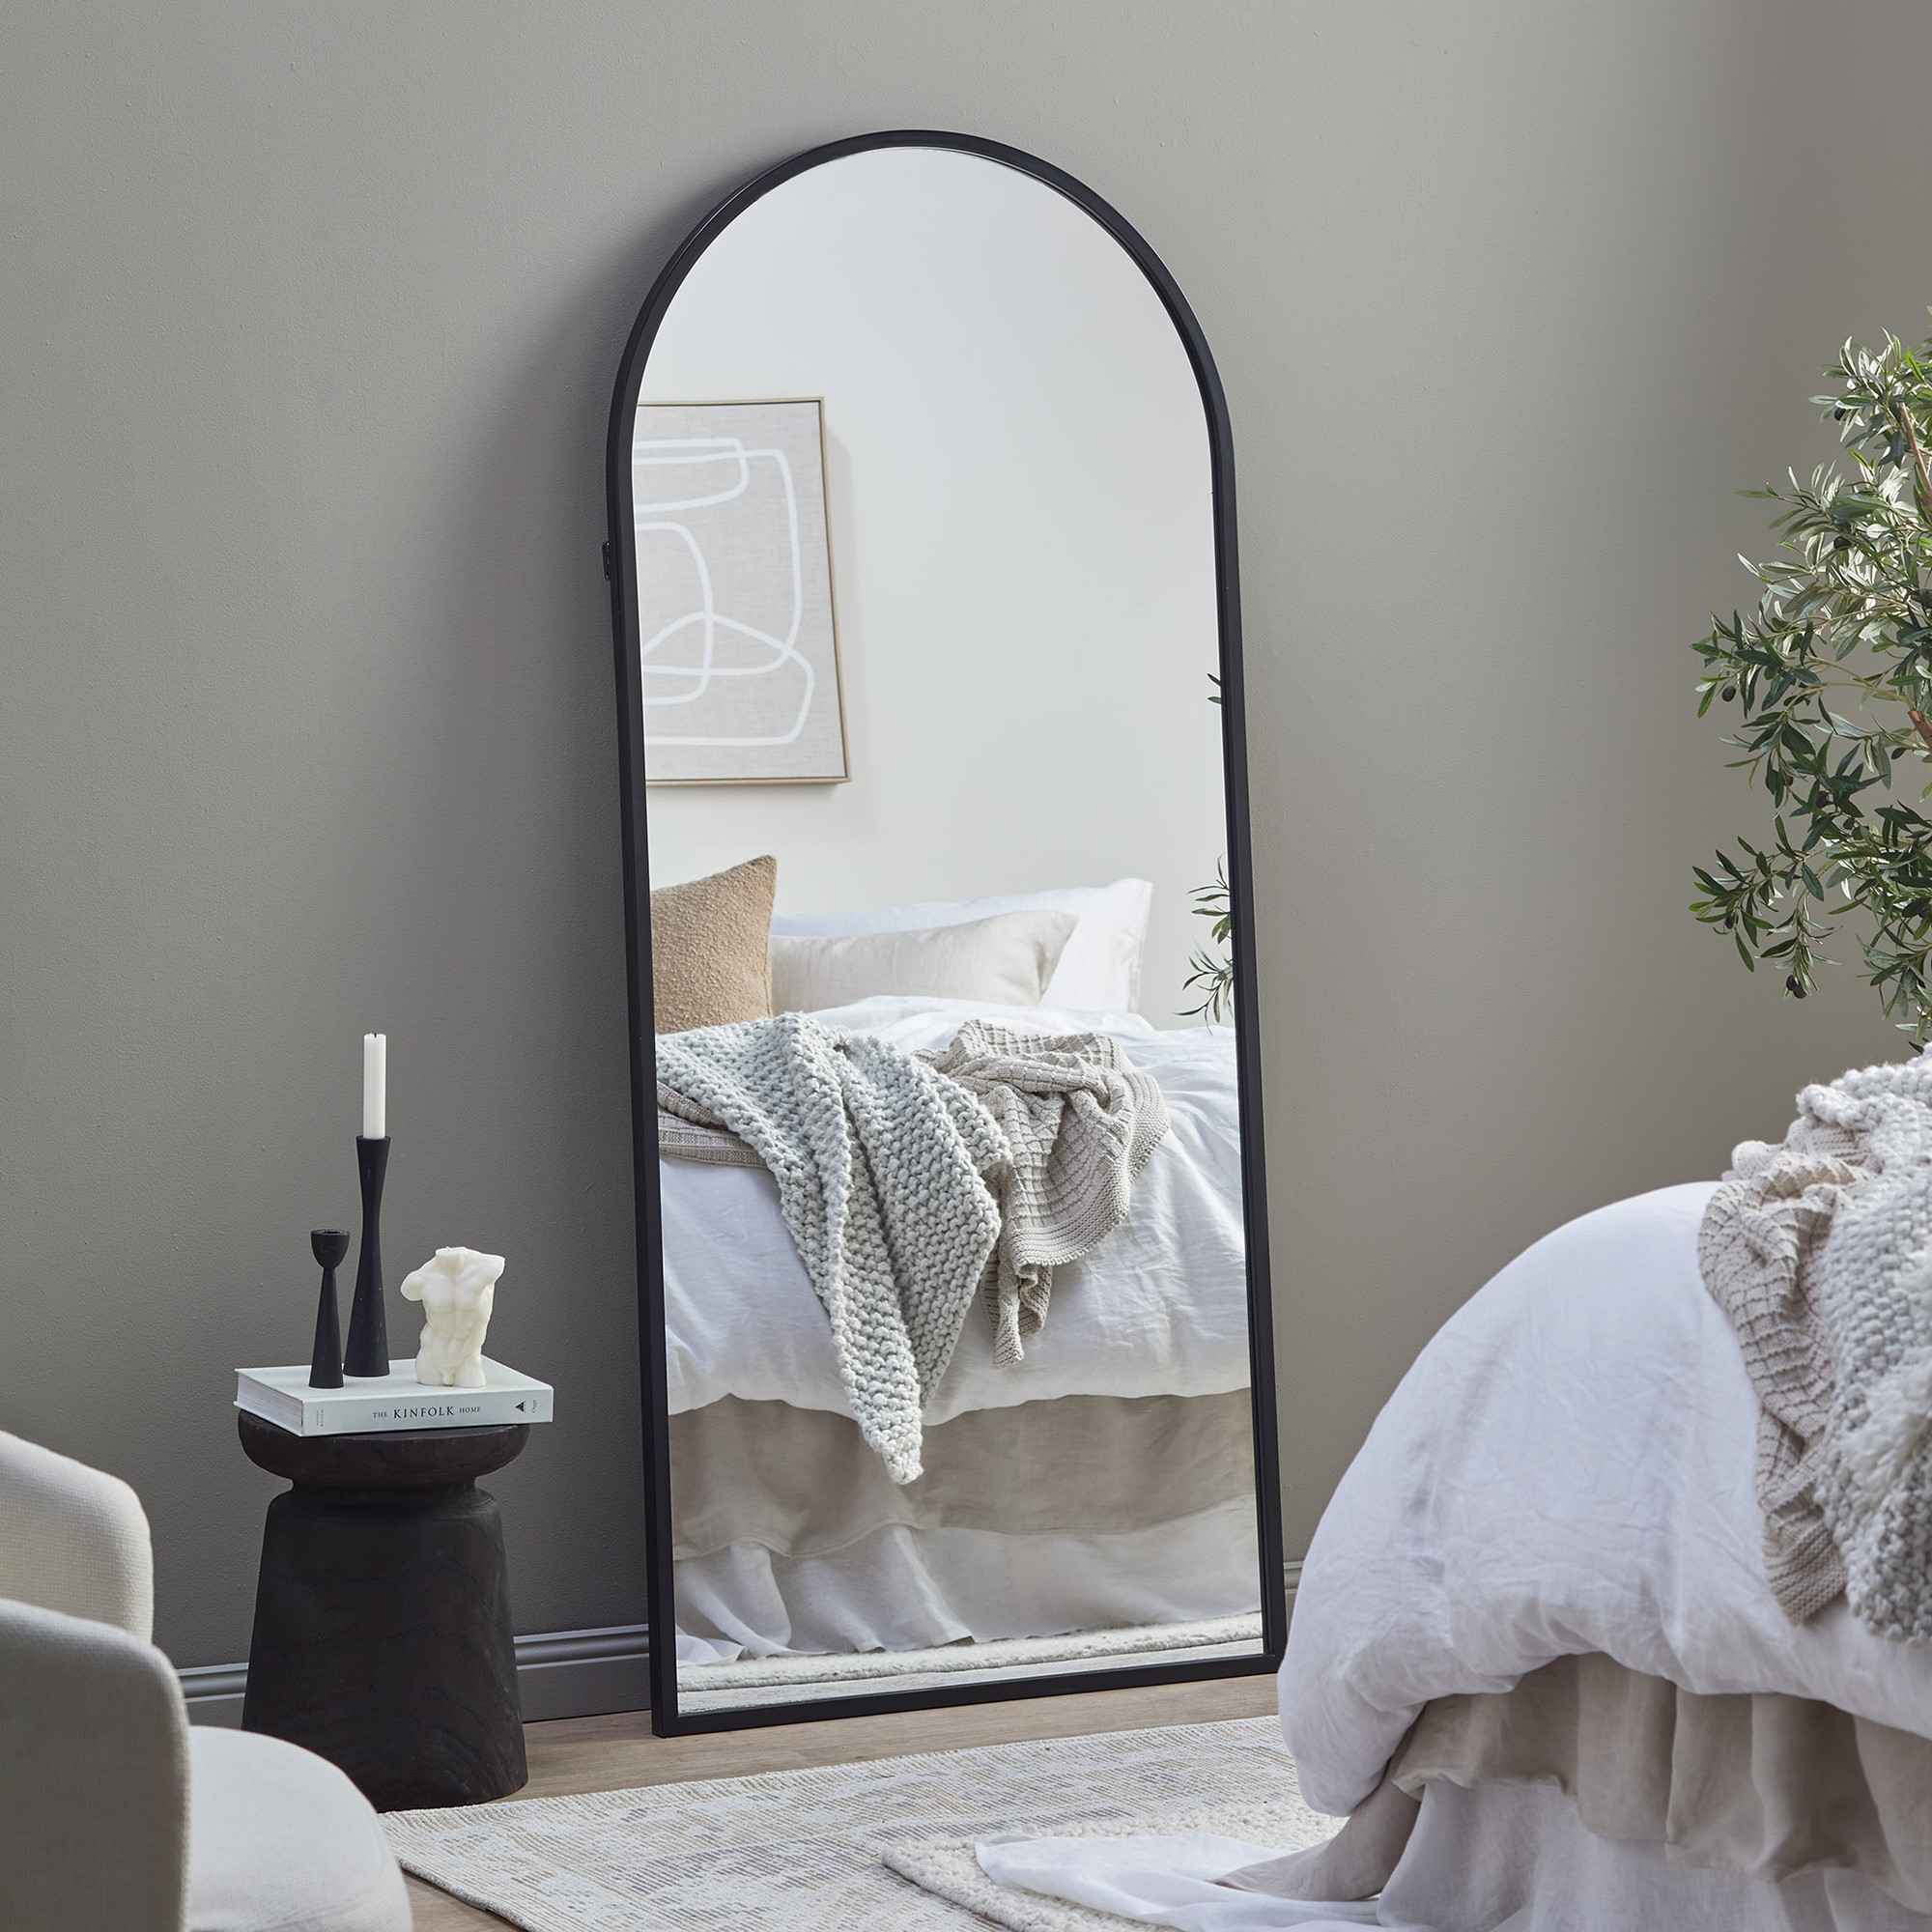 mirror in a bedroom with black side table, bed, indoor plants, candles and chair